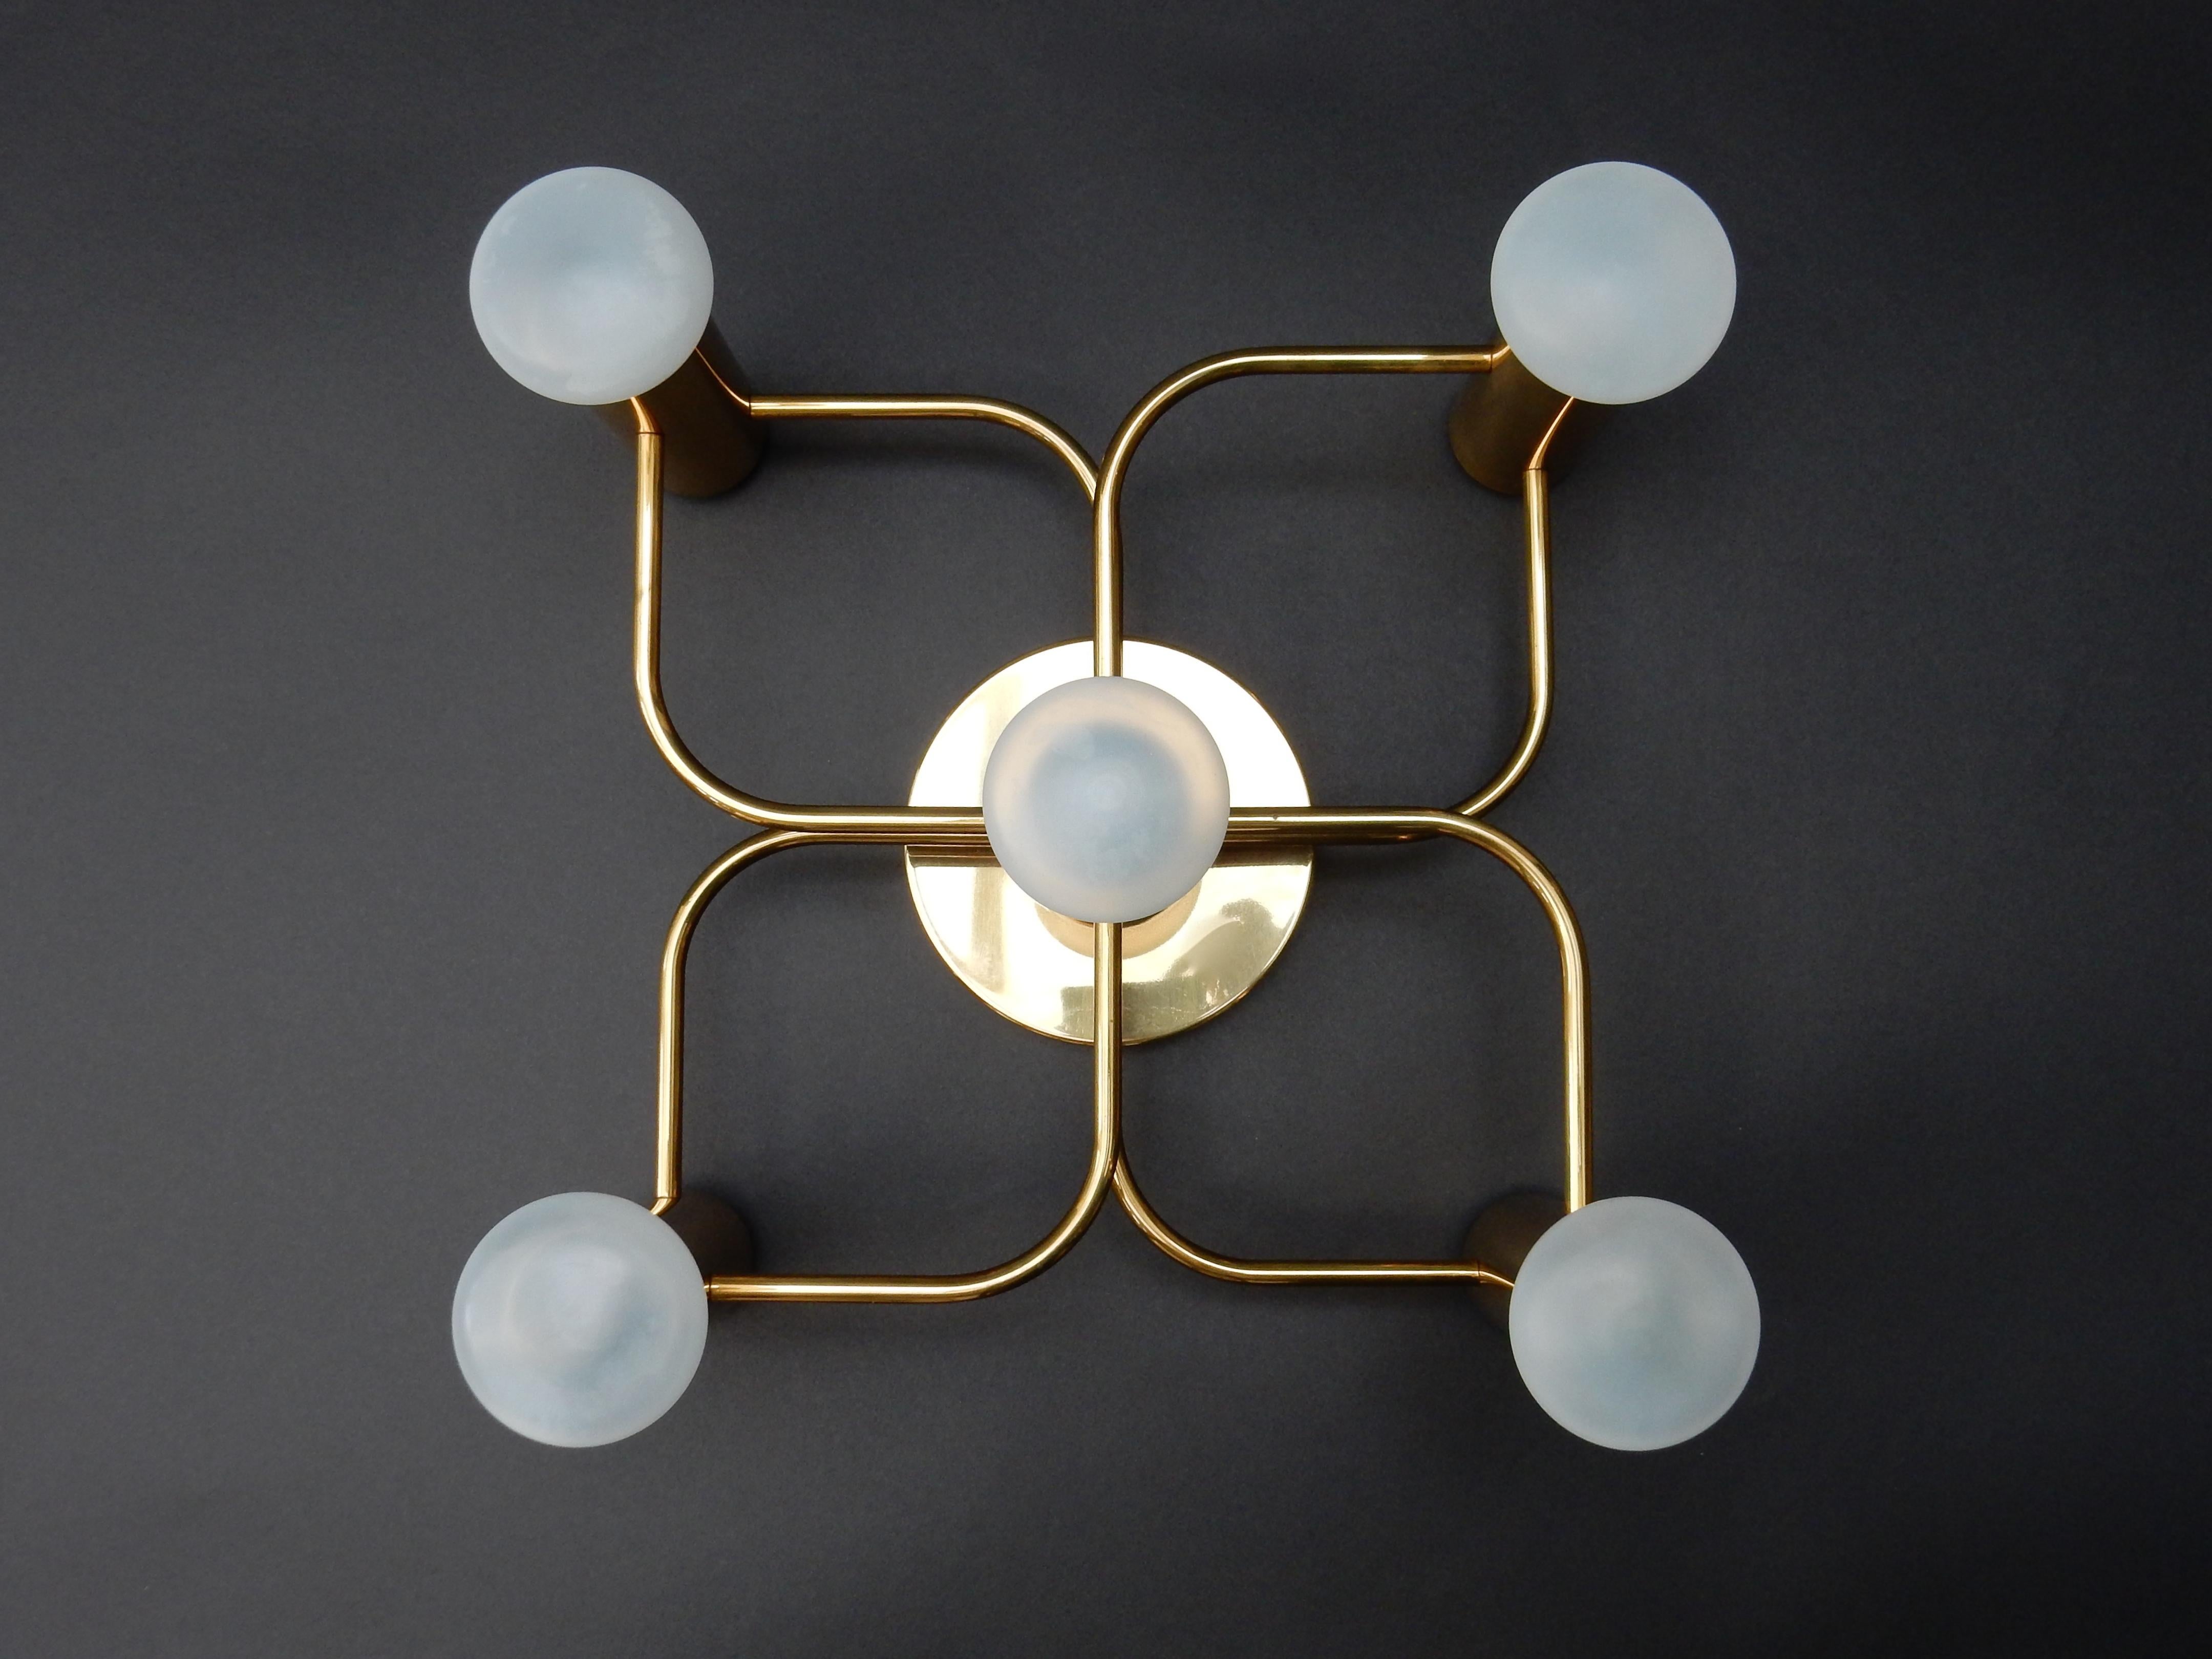 Ceiling or wall light mount chandelier by Leola, 1960s.